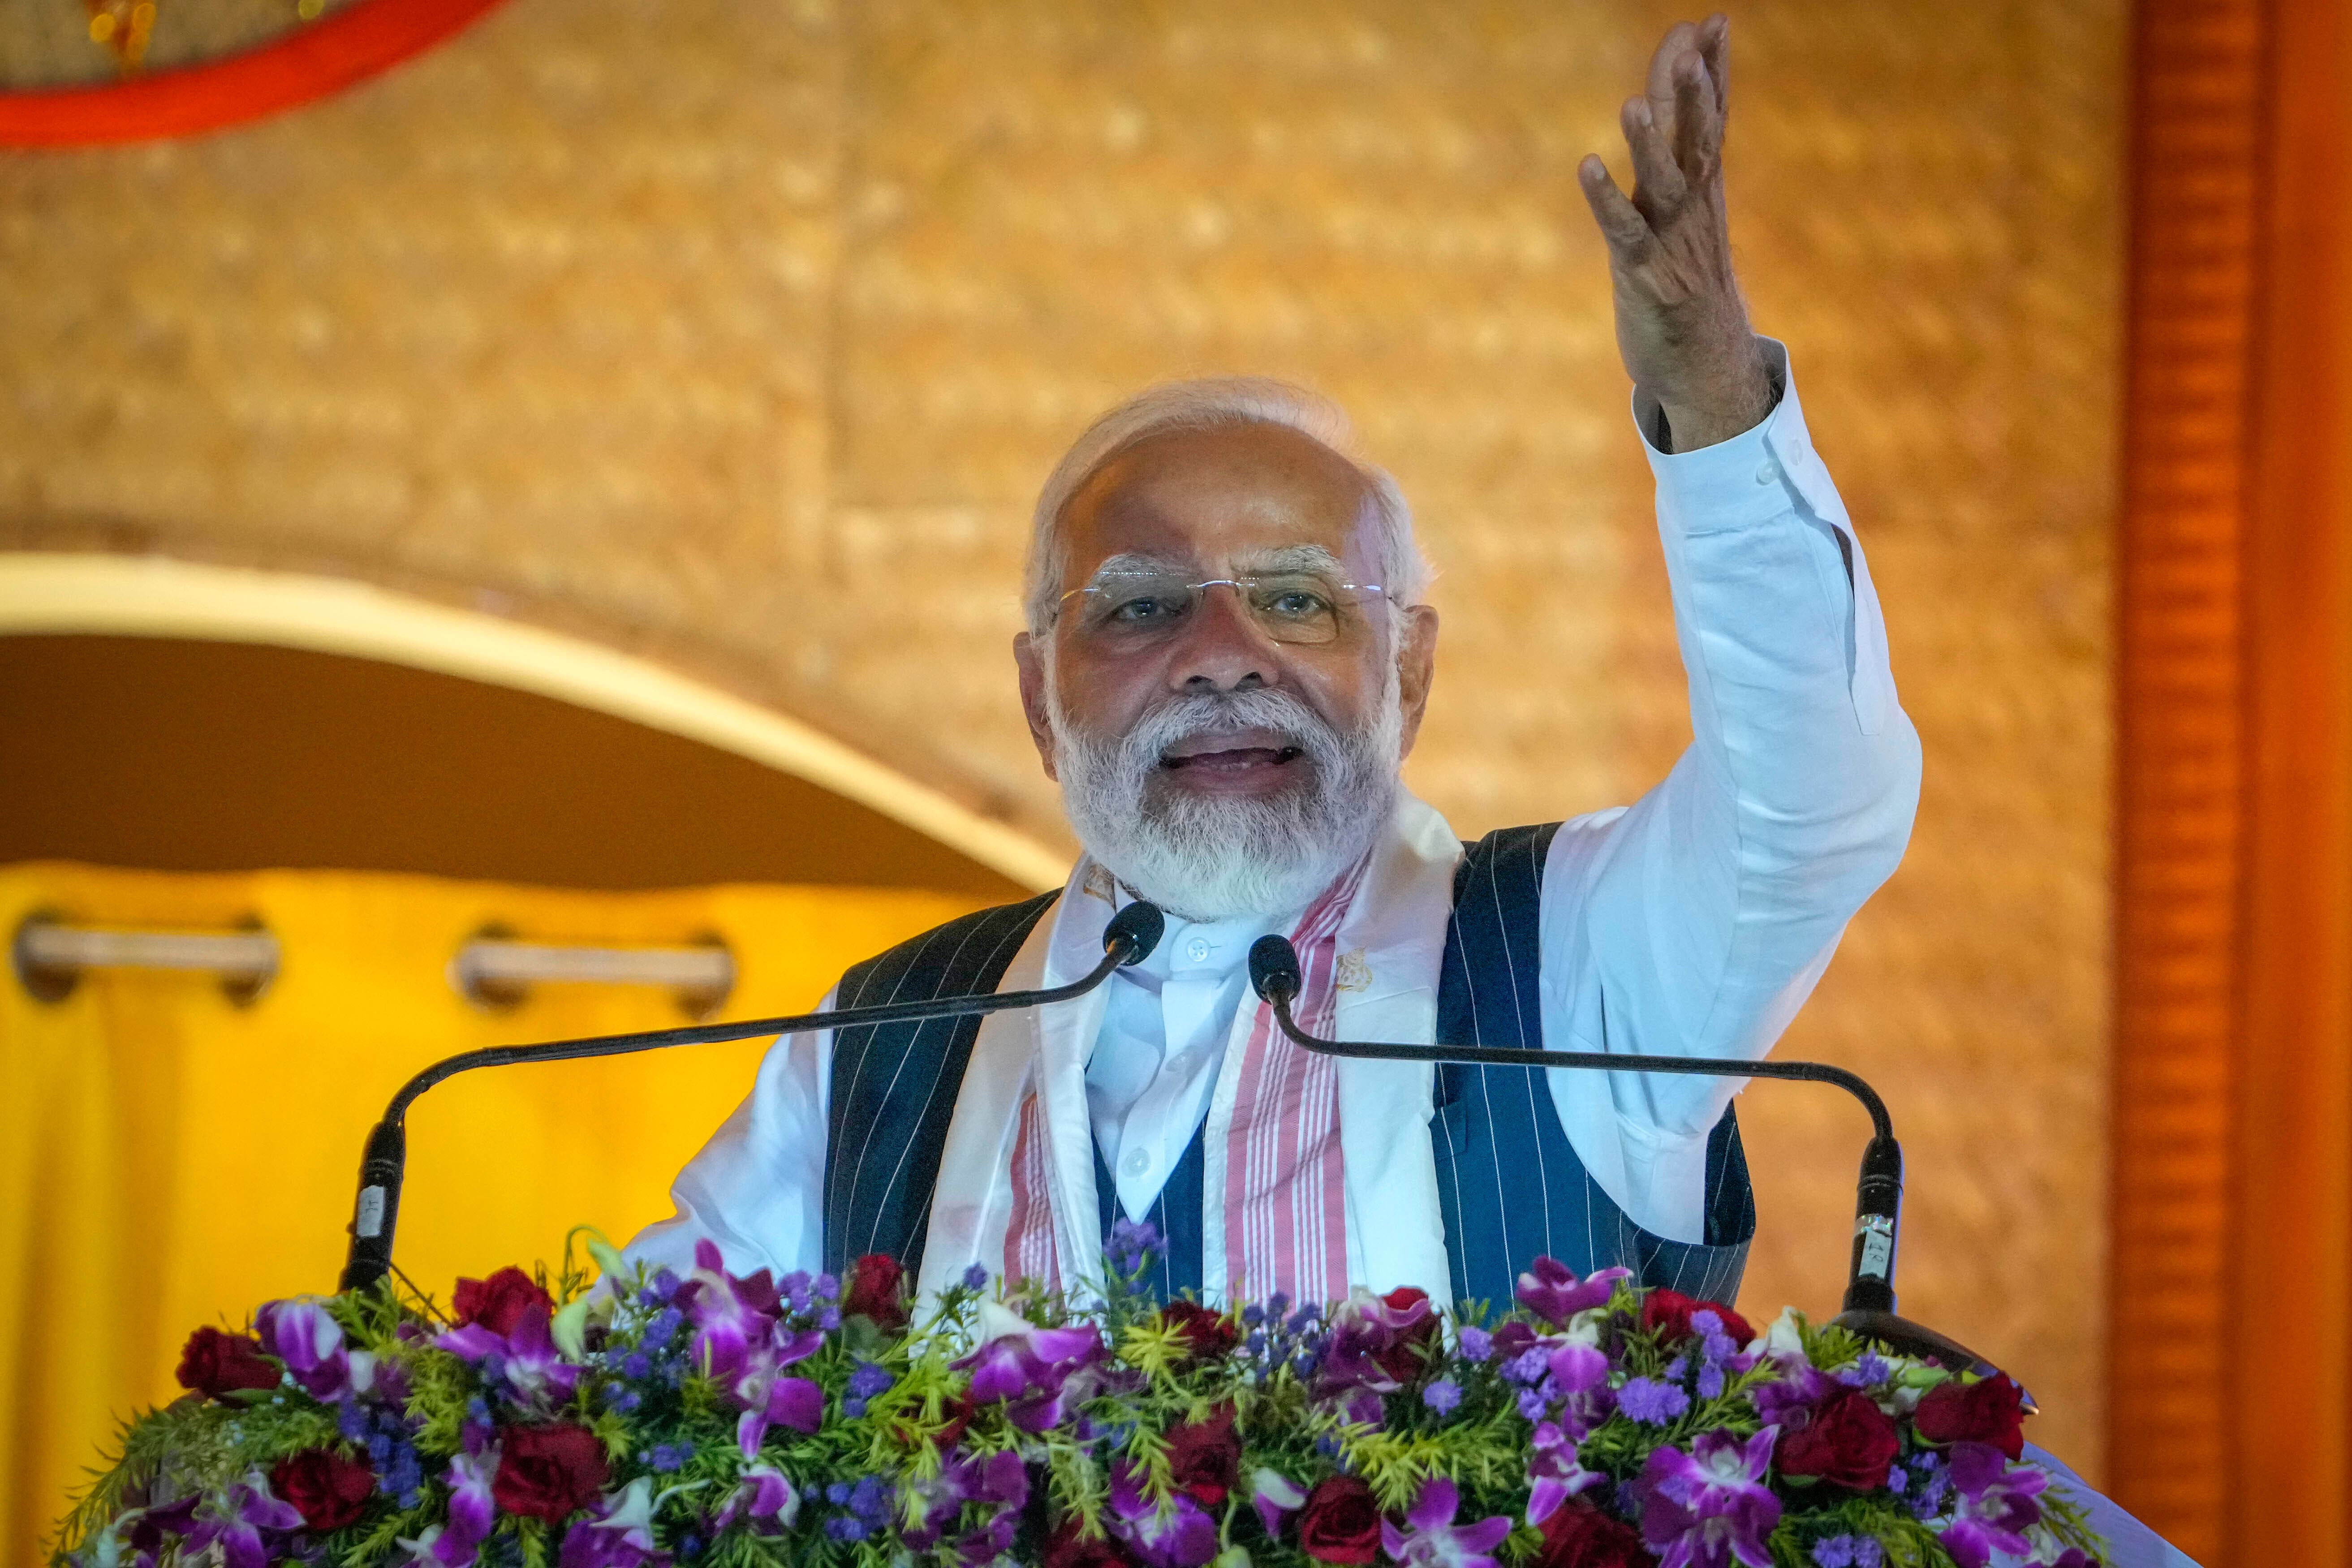 <p>Indian Prime Minister Narendra Modi speaks during an event</p>